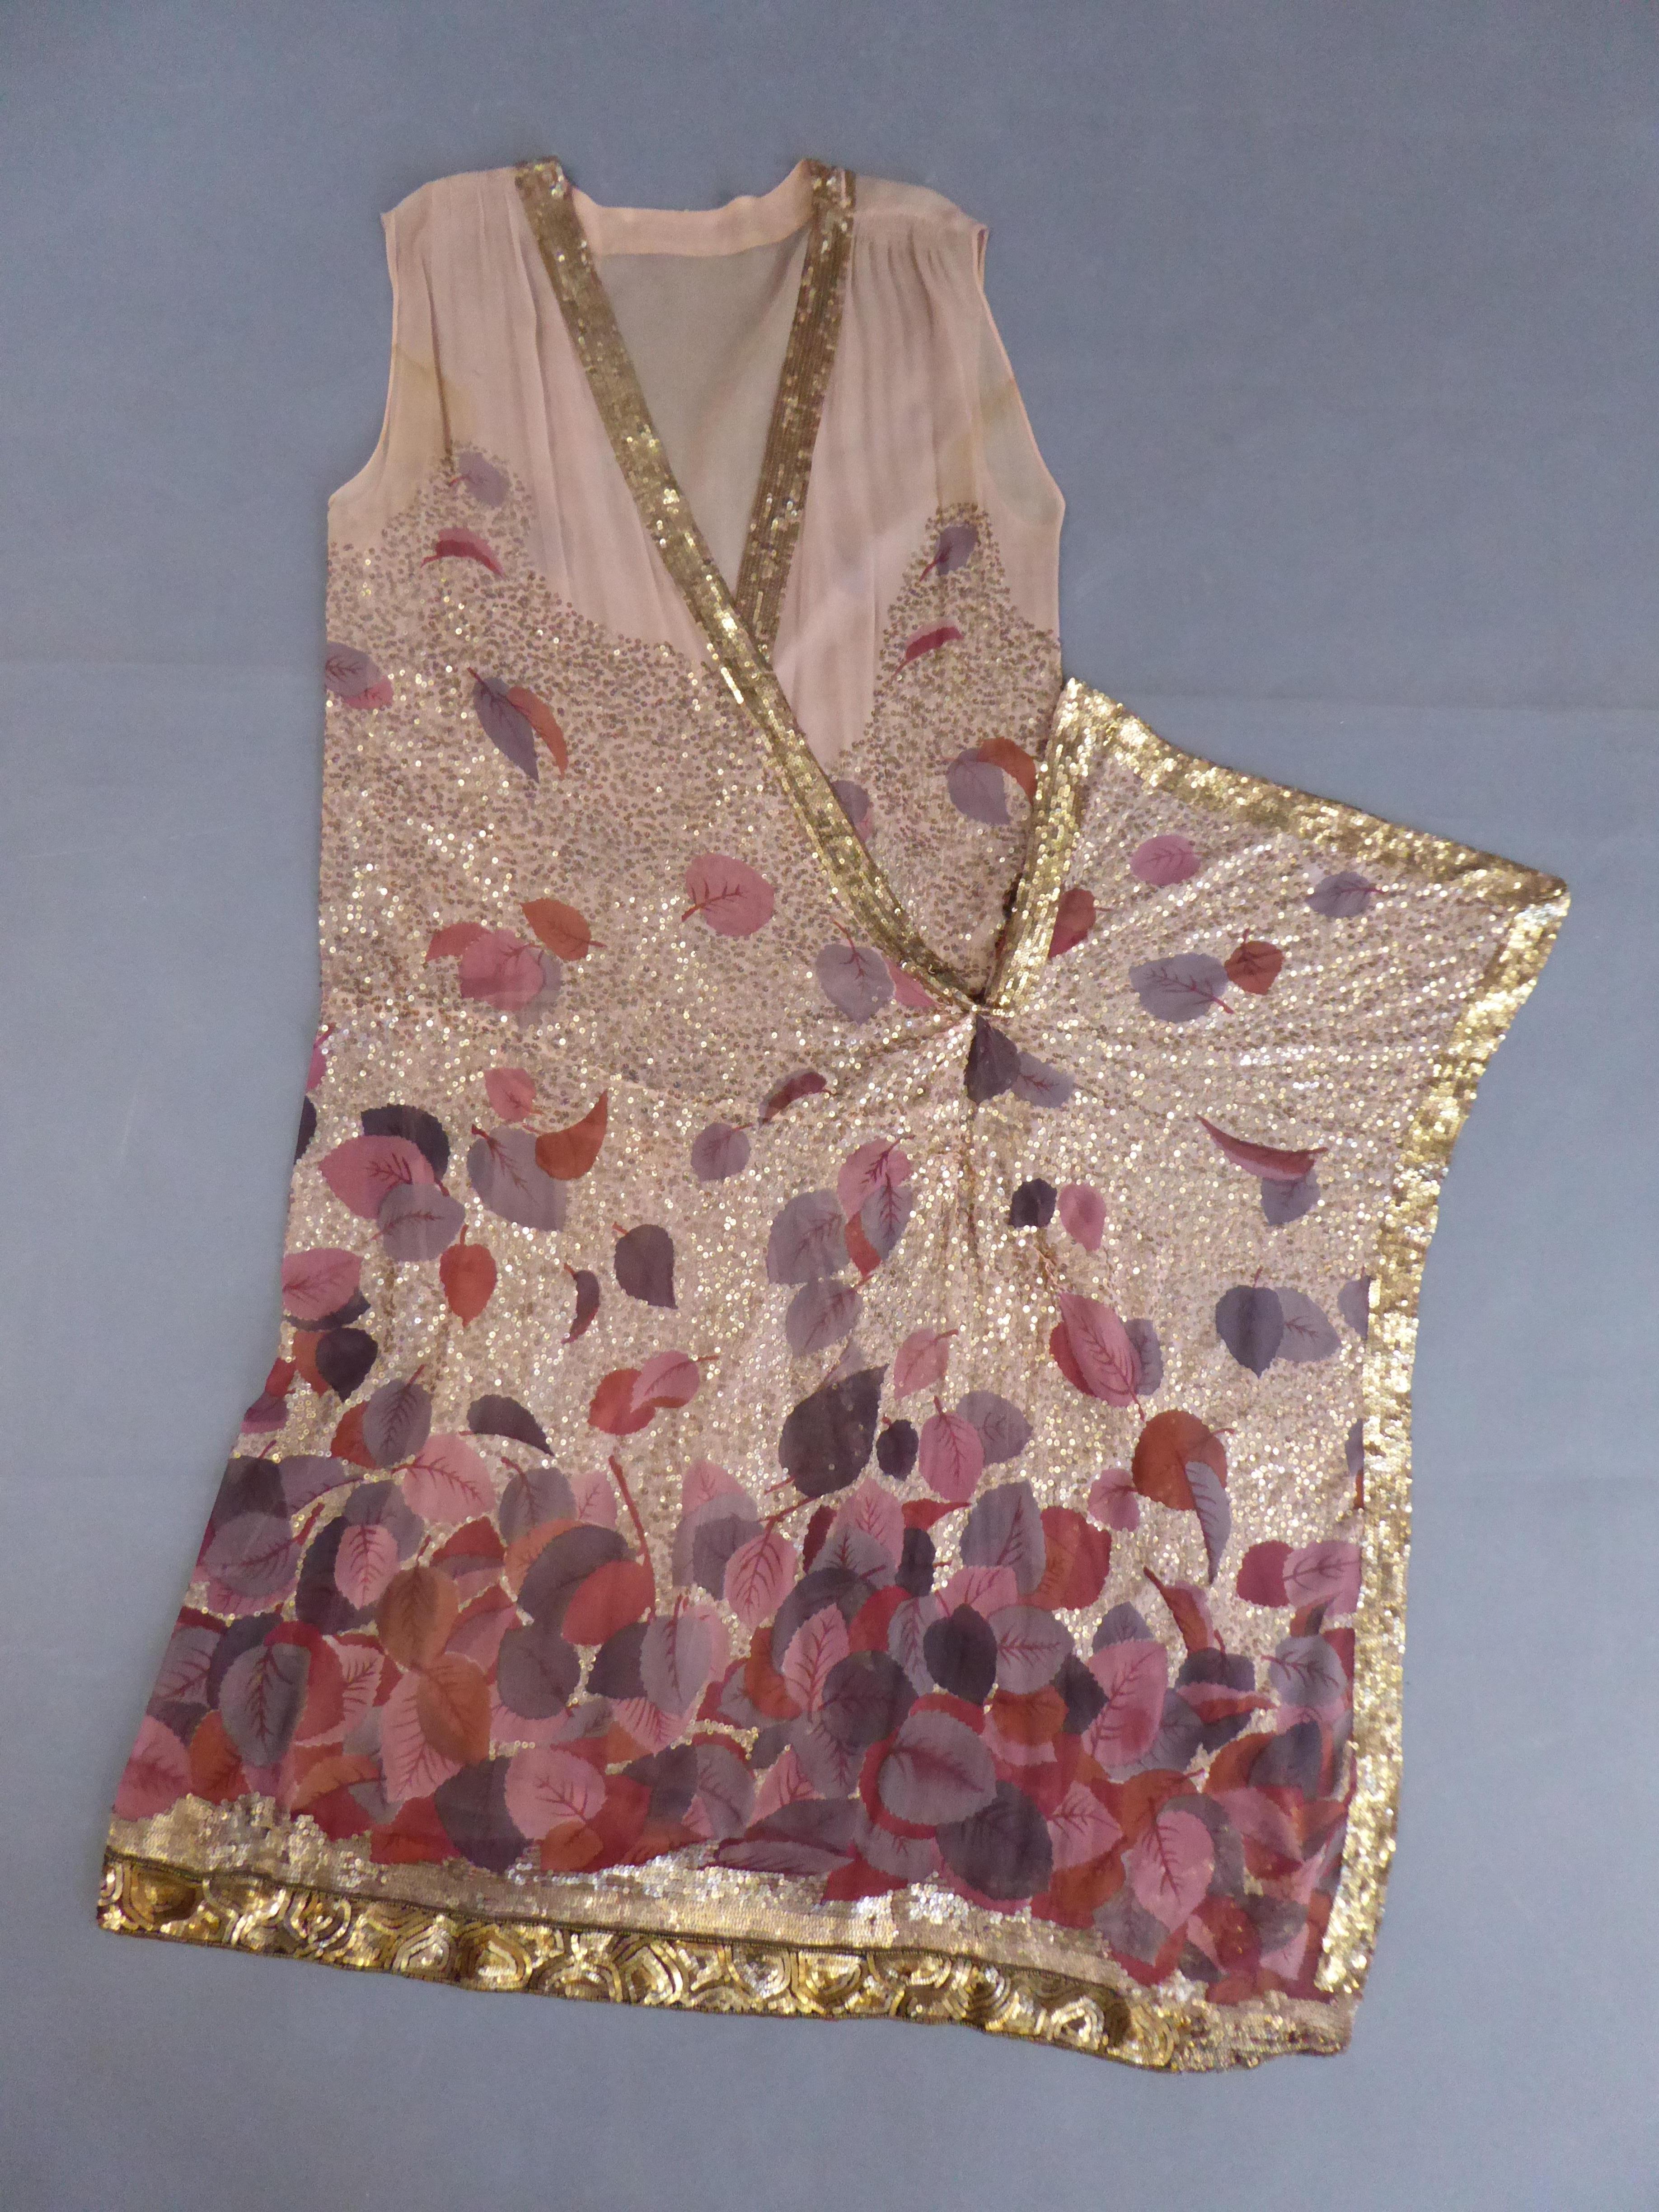 Circa 1928
Paris France

A printed chiffon silk and gold sequined mid-long sleeveless tunic dress attributed to Jeanne Lanvin. Printed background in gradient of falling autumn leaves whose voids are entirely embroidered with random seeding golden